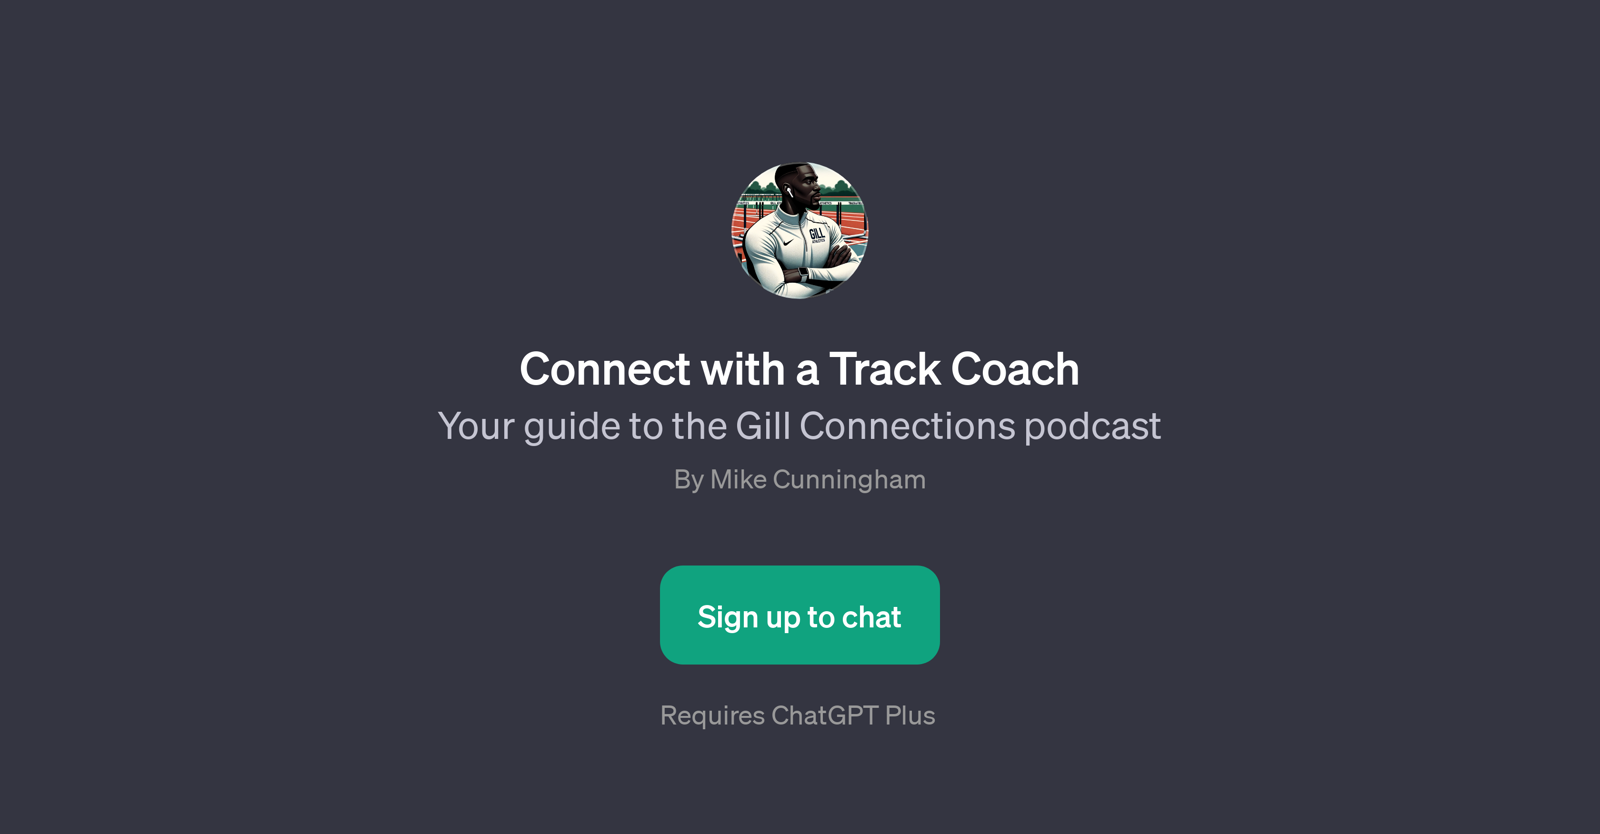 Connect with a Track Coach website